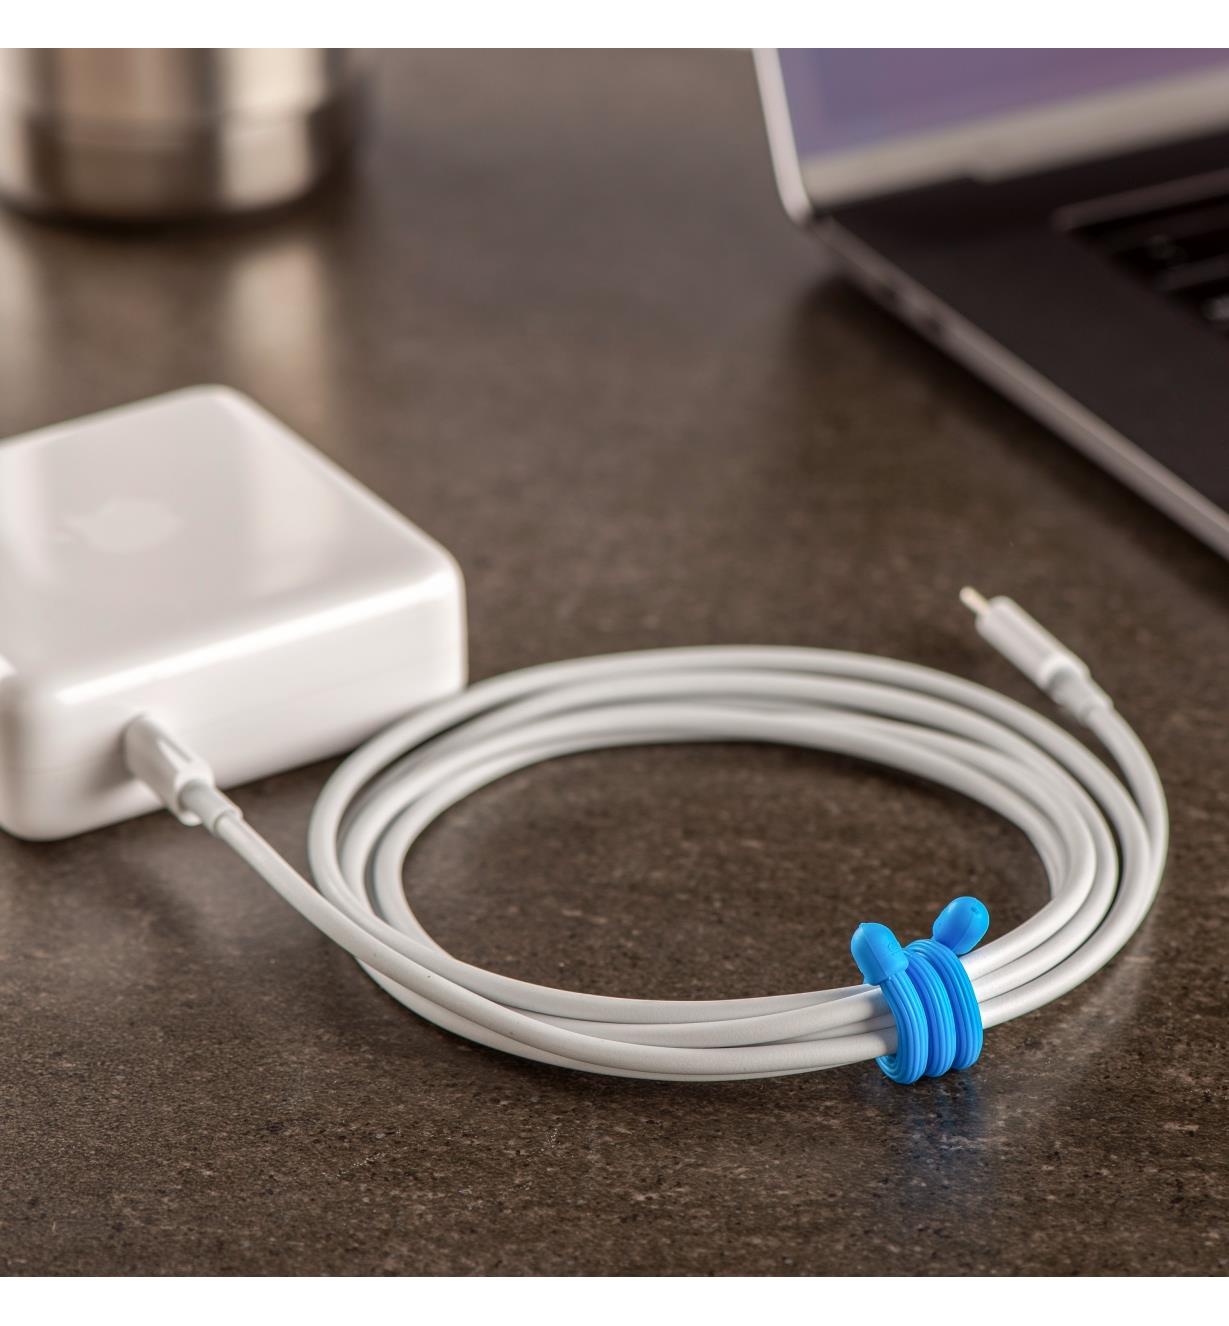 6” blue gear tie used to bundle a laptop charging cord